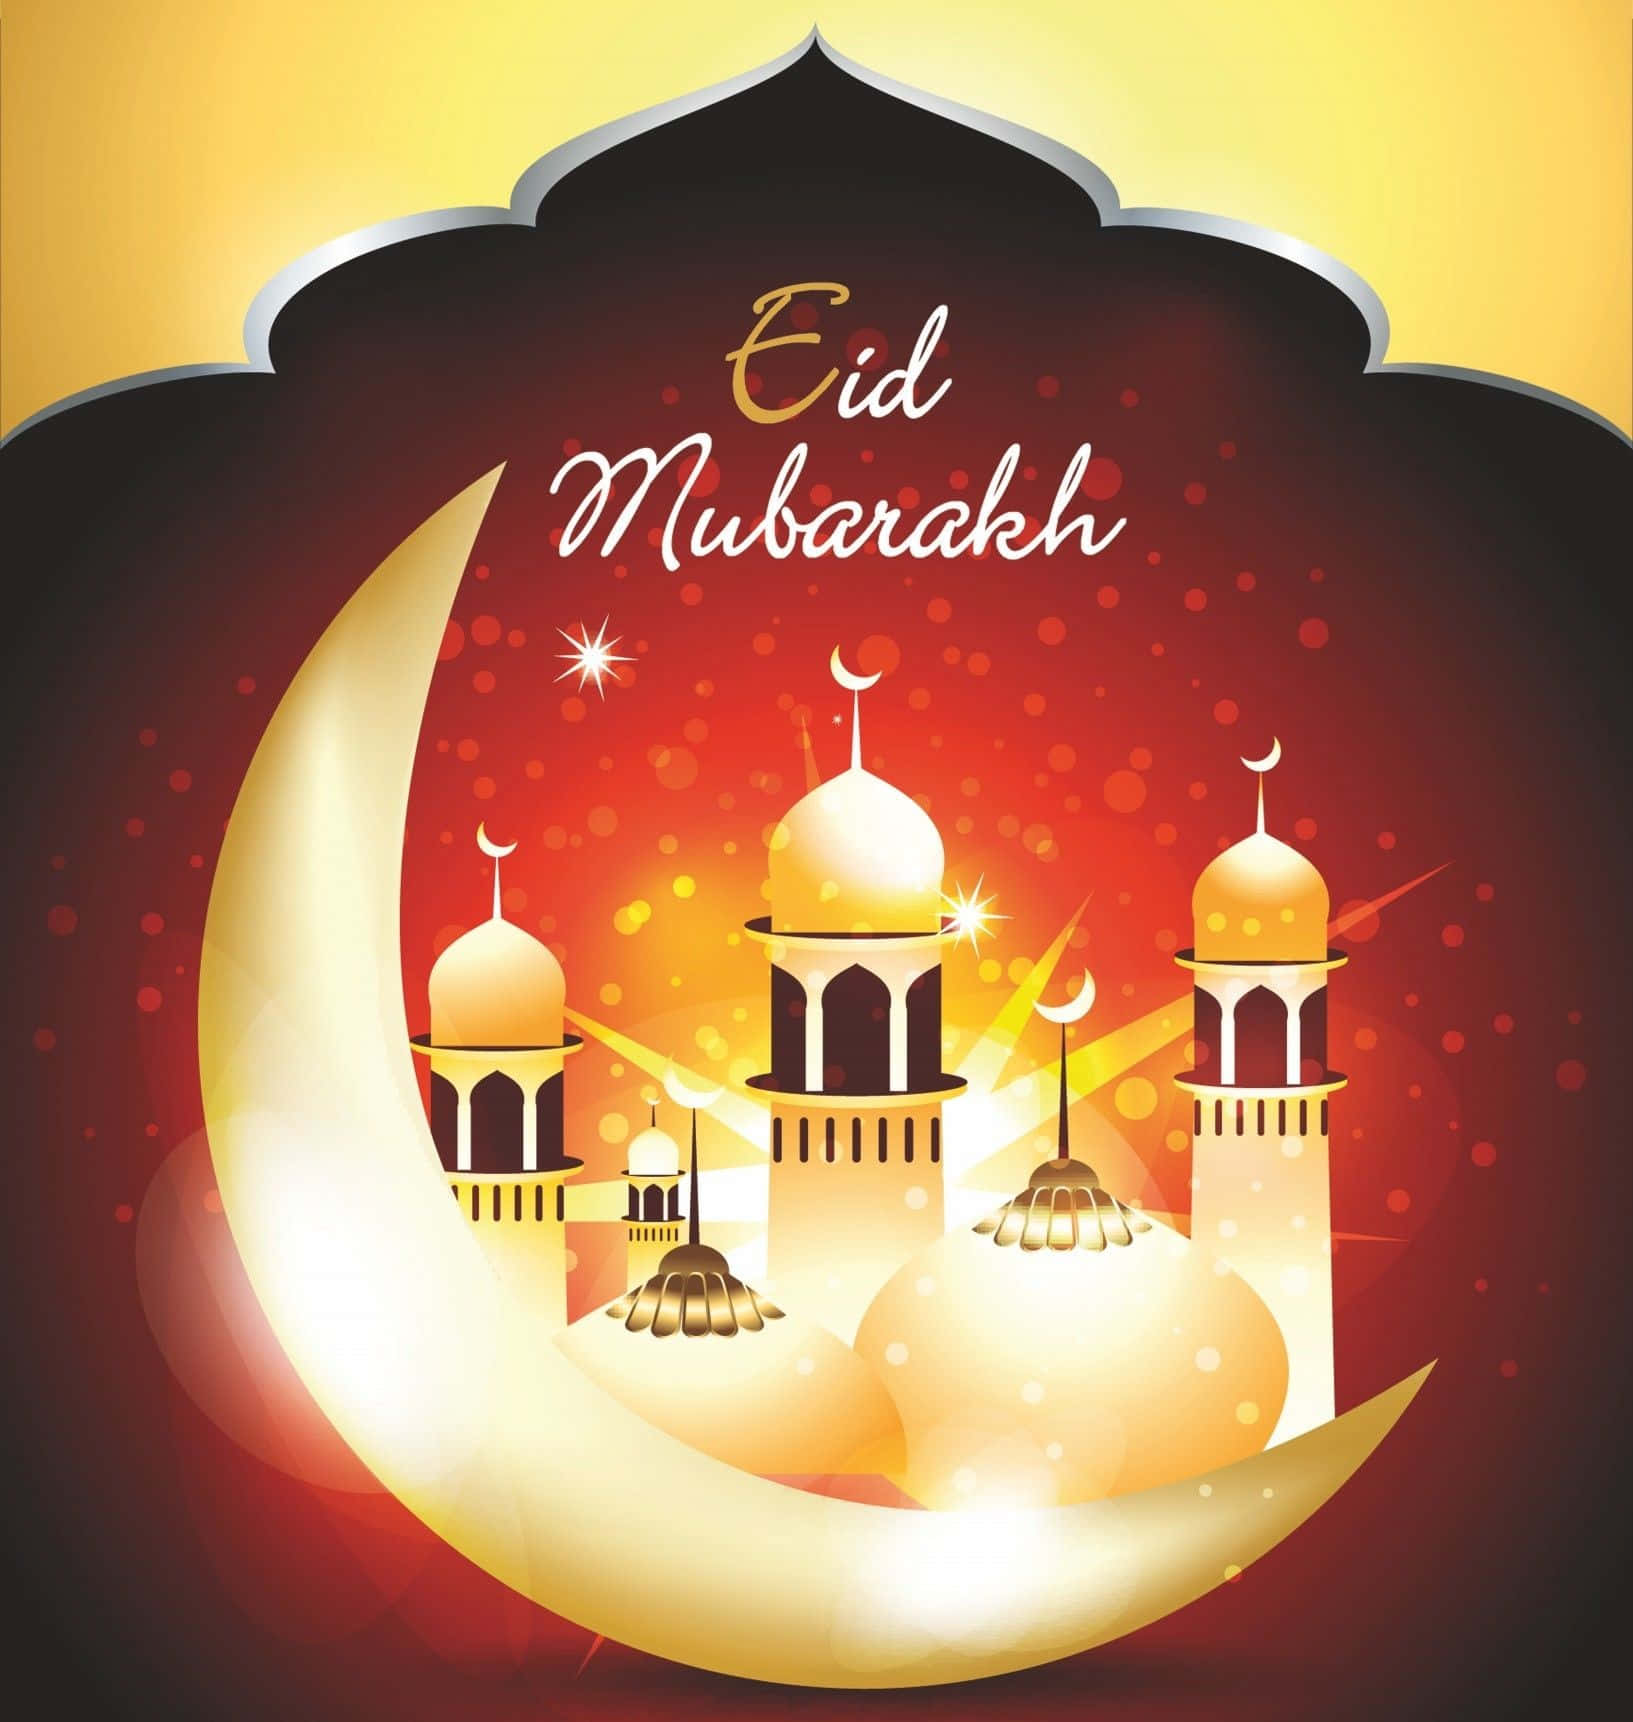 Eid Mubarak Greeting Card With Golden Crescent And Mosque